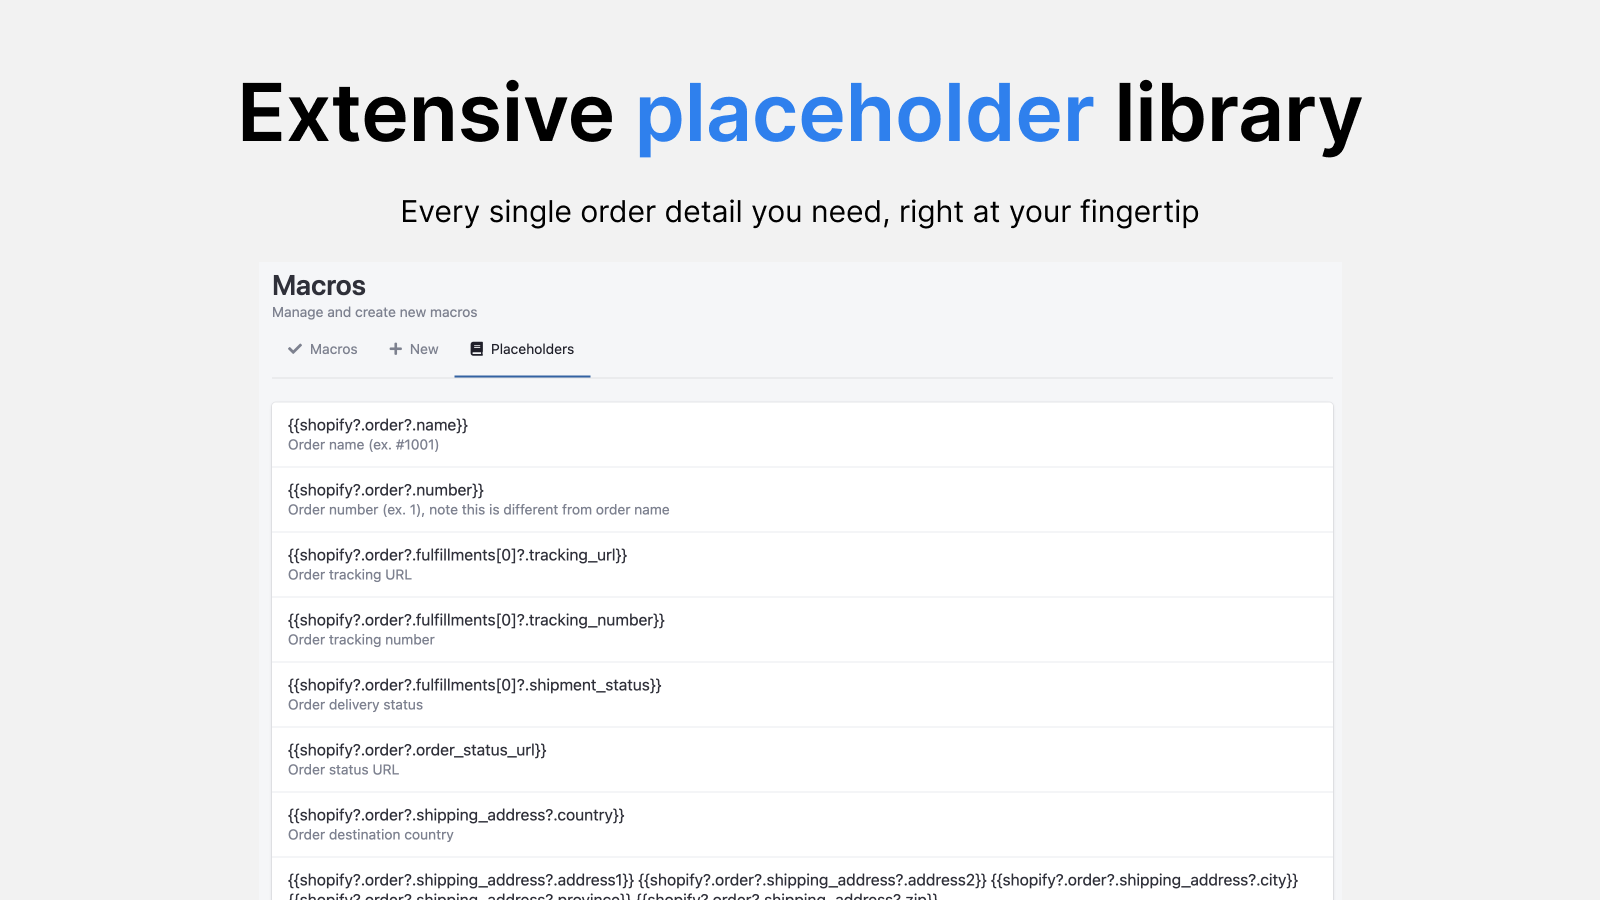 Extensive placeholder library